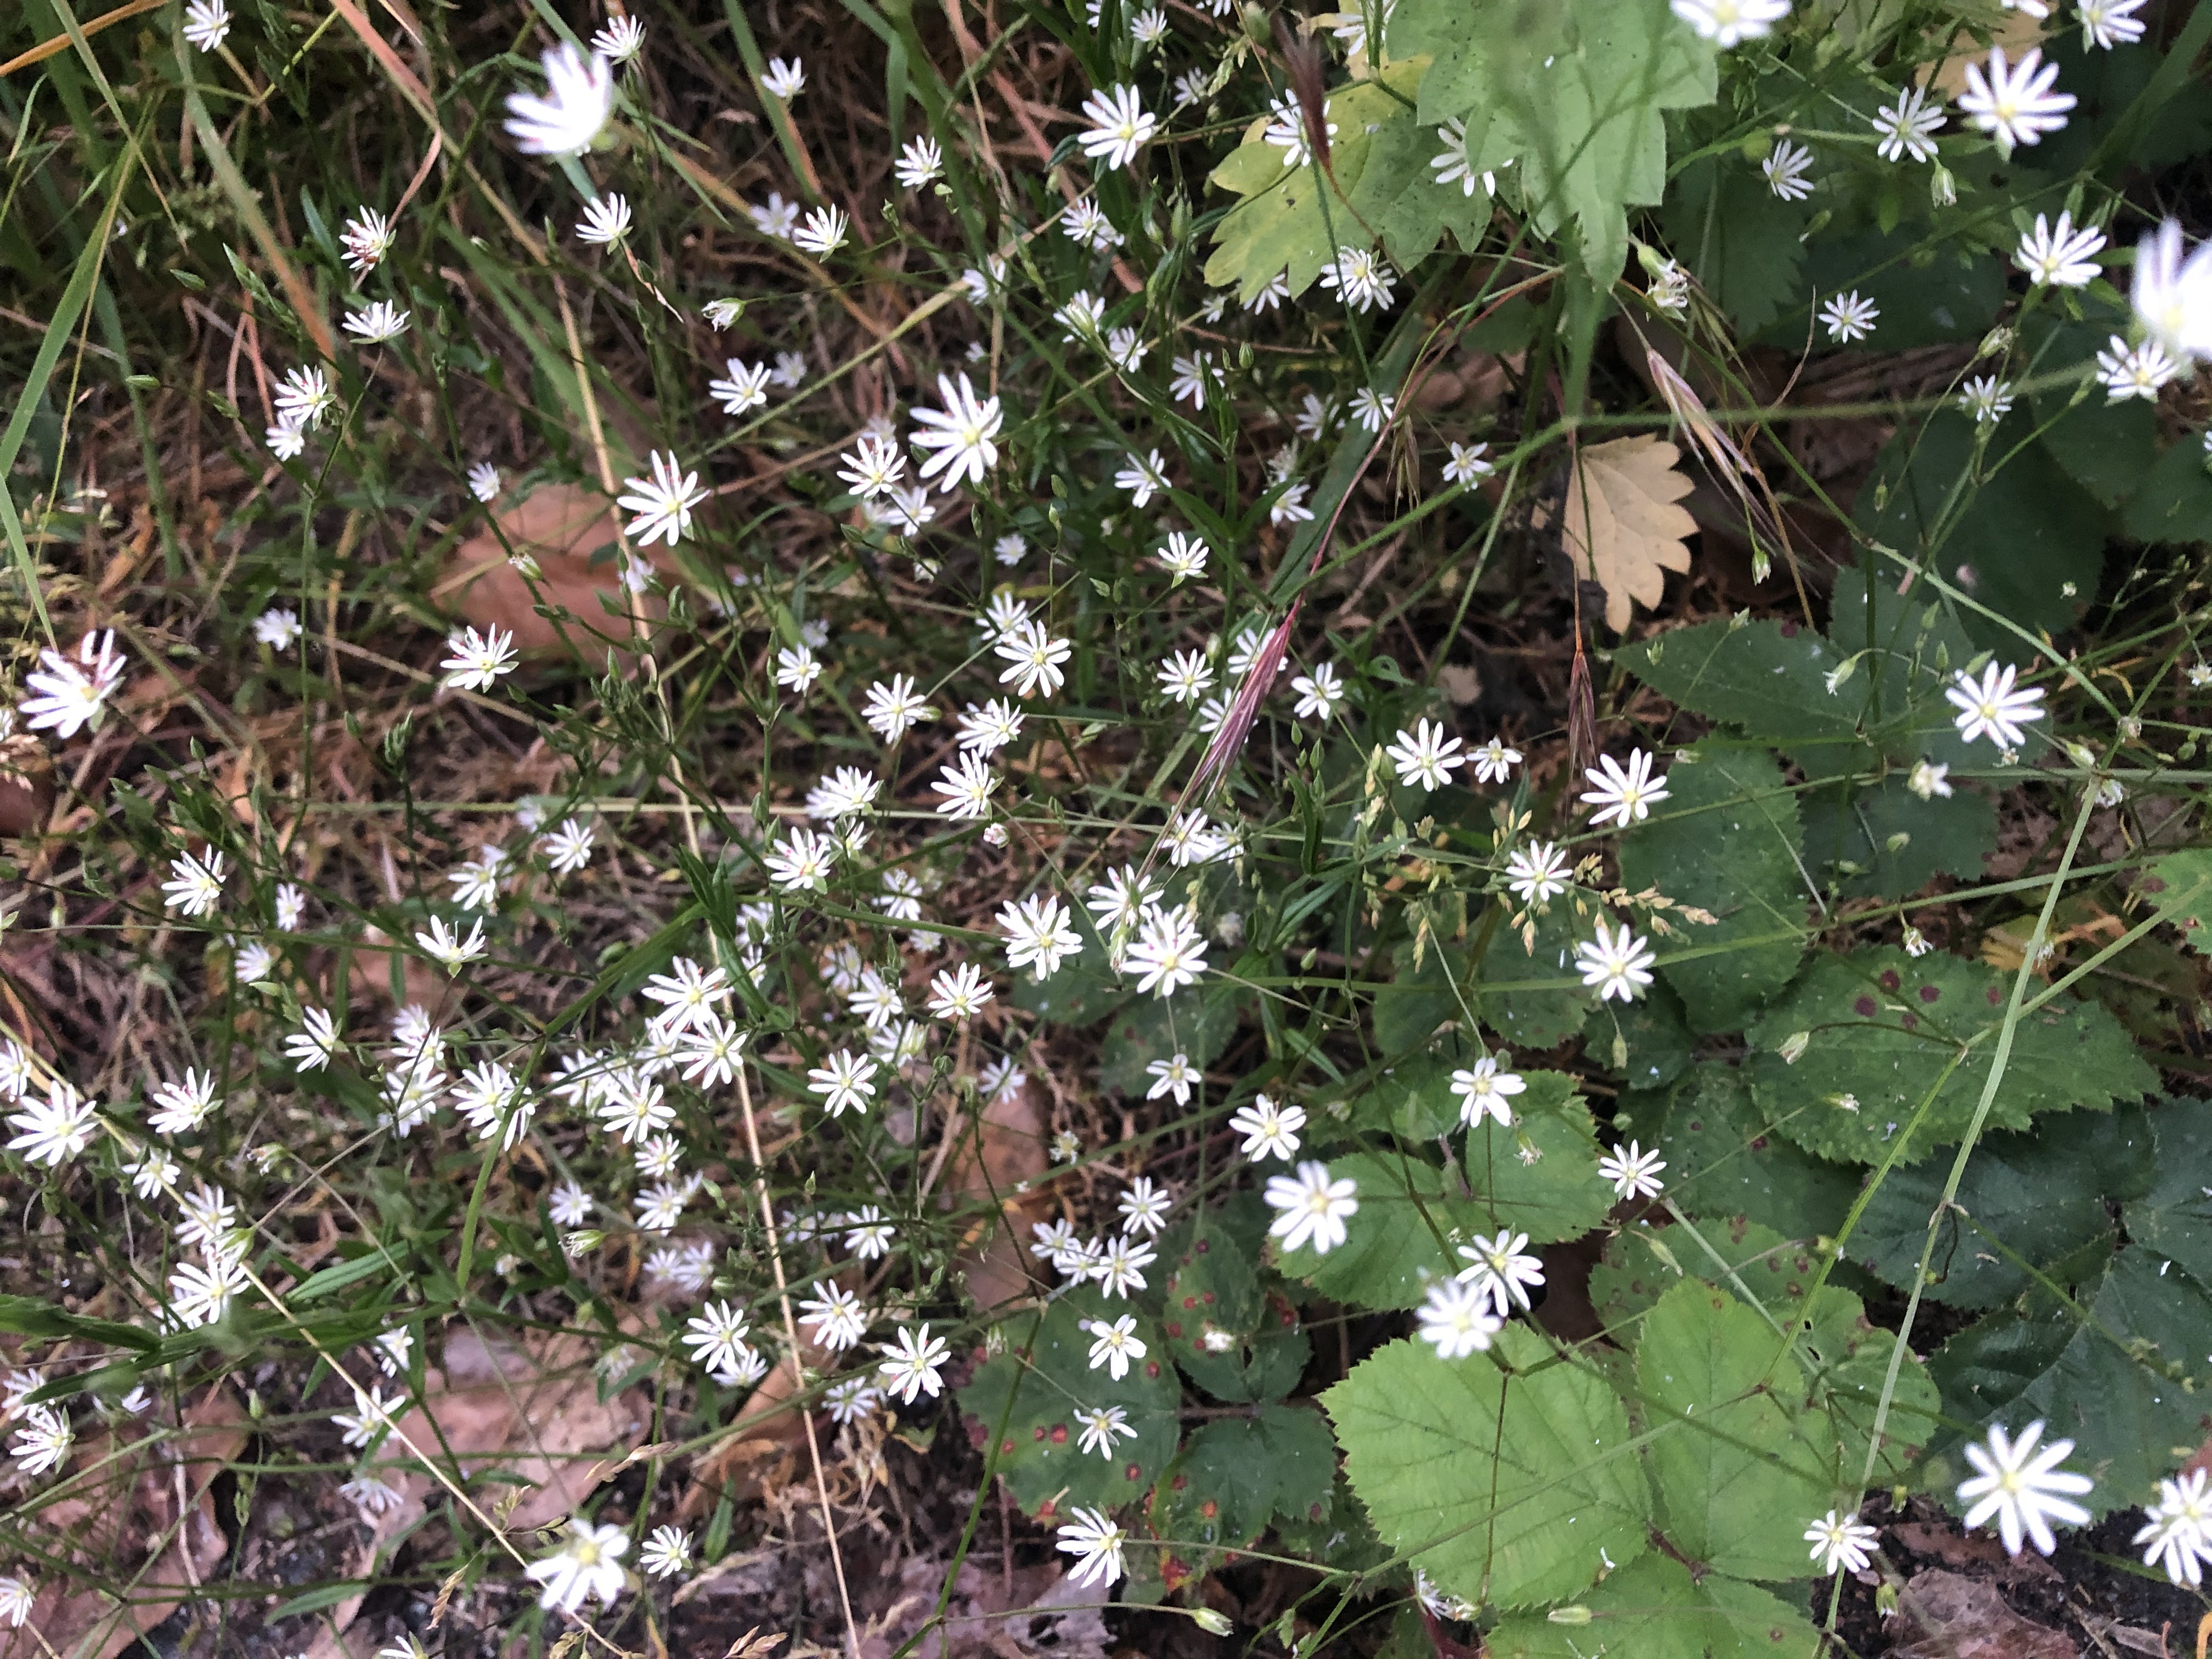 small white flower between blackberry leaves and grass